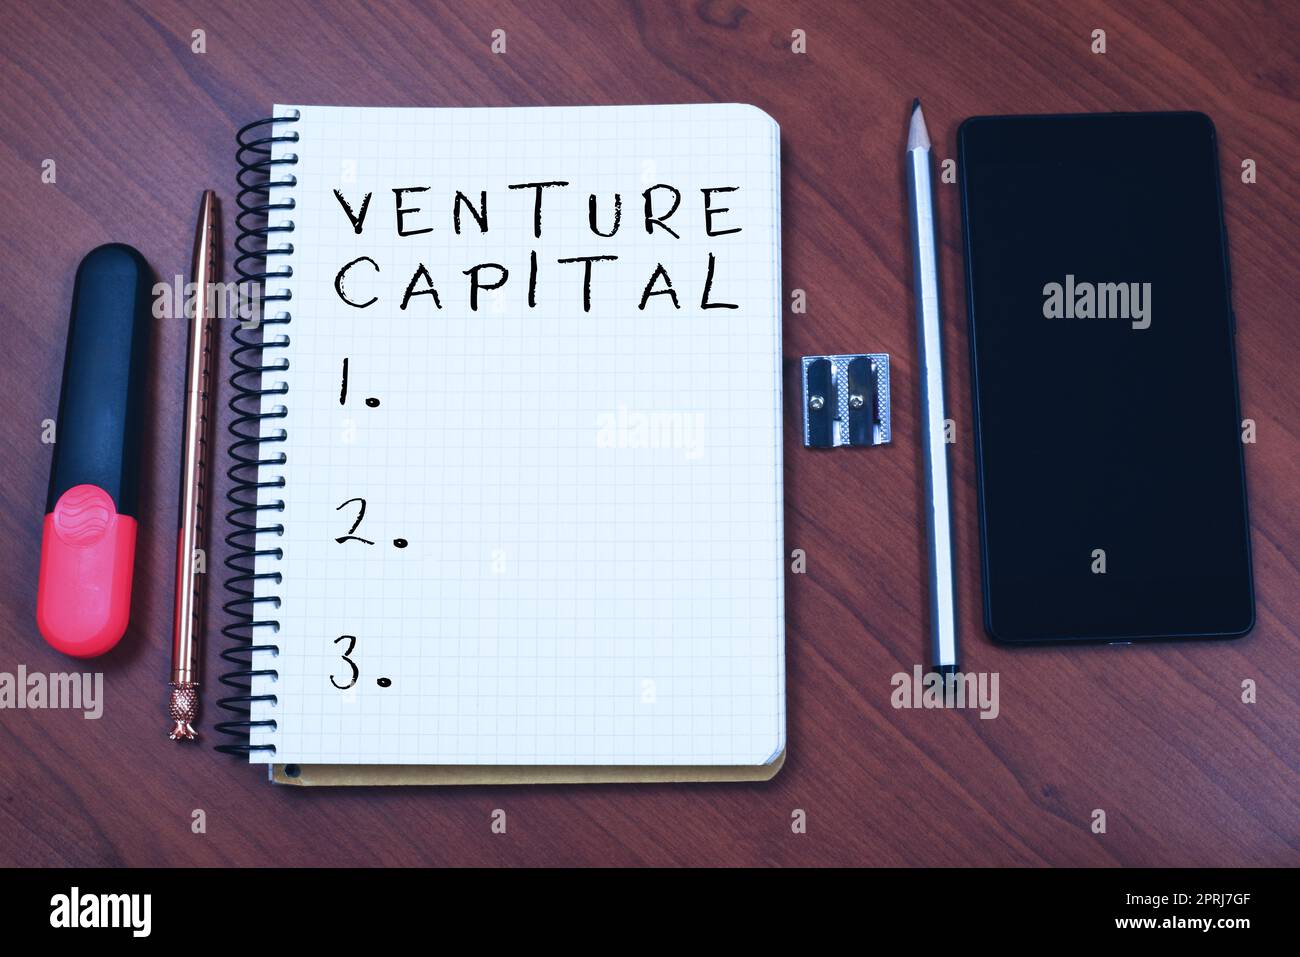 Writing displaying text Venture Capitalfinancing provided by firms to small early stage ones. Business concept financing provided by firms to small early stage ones Stock Photo